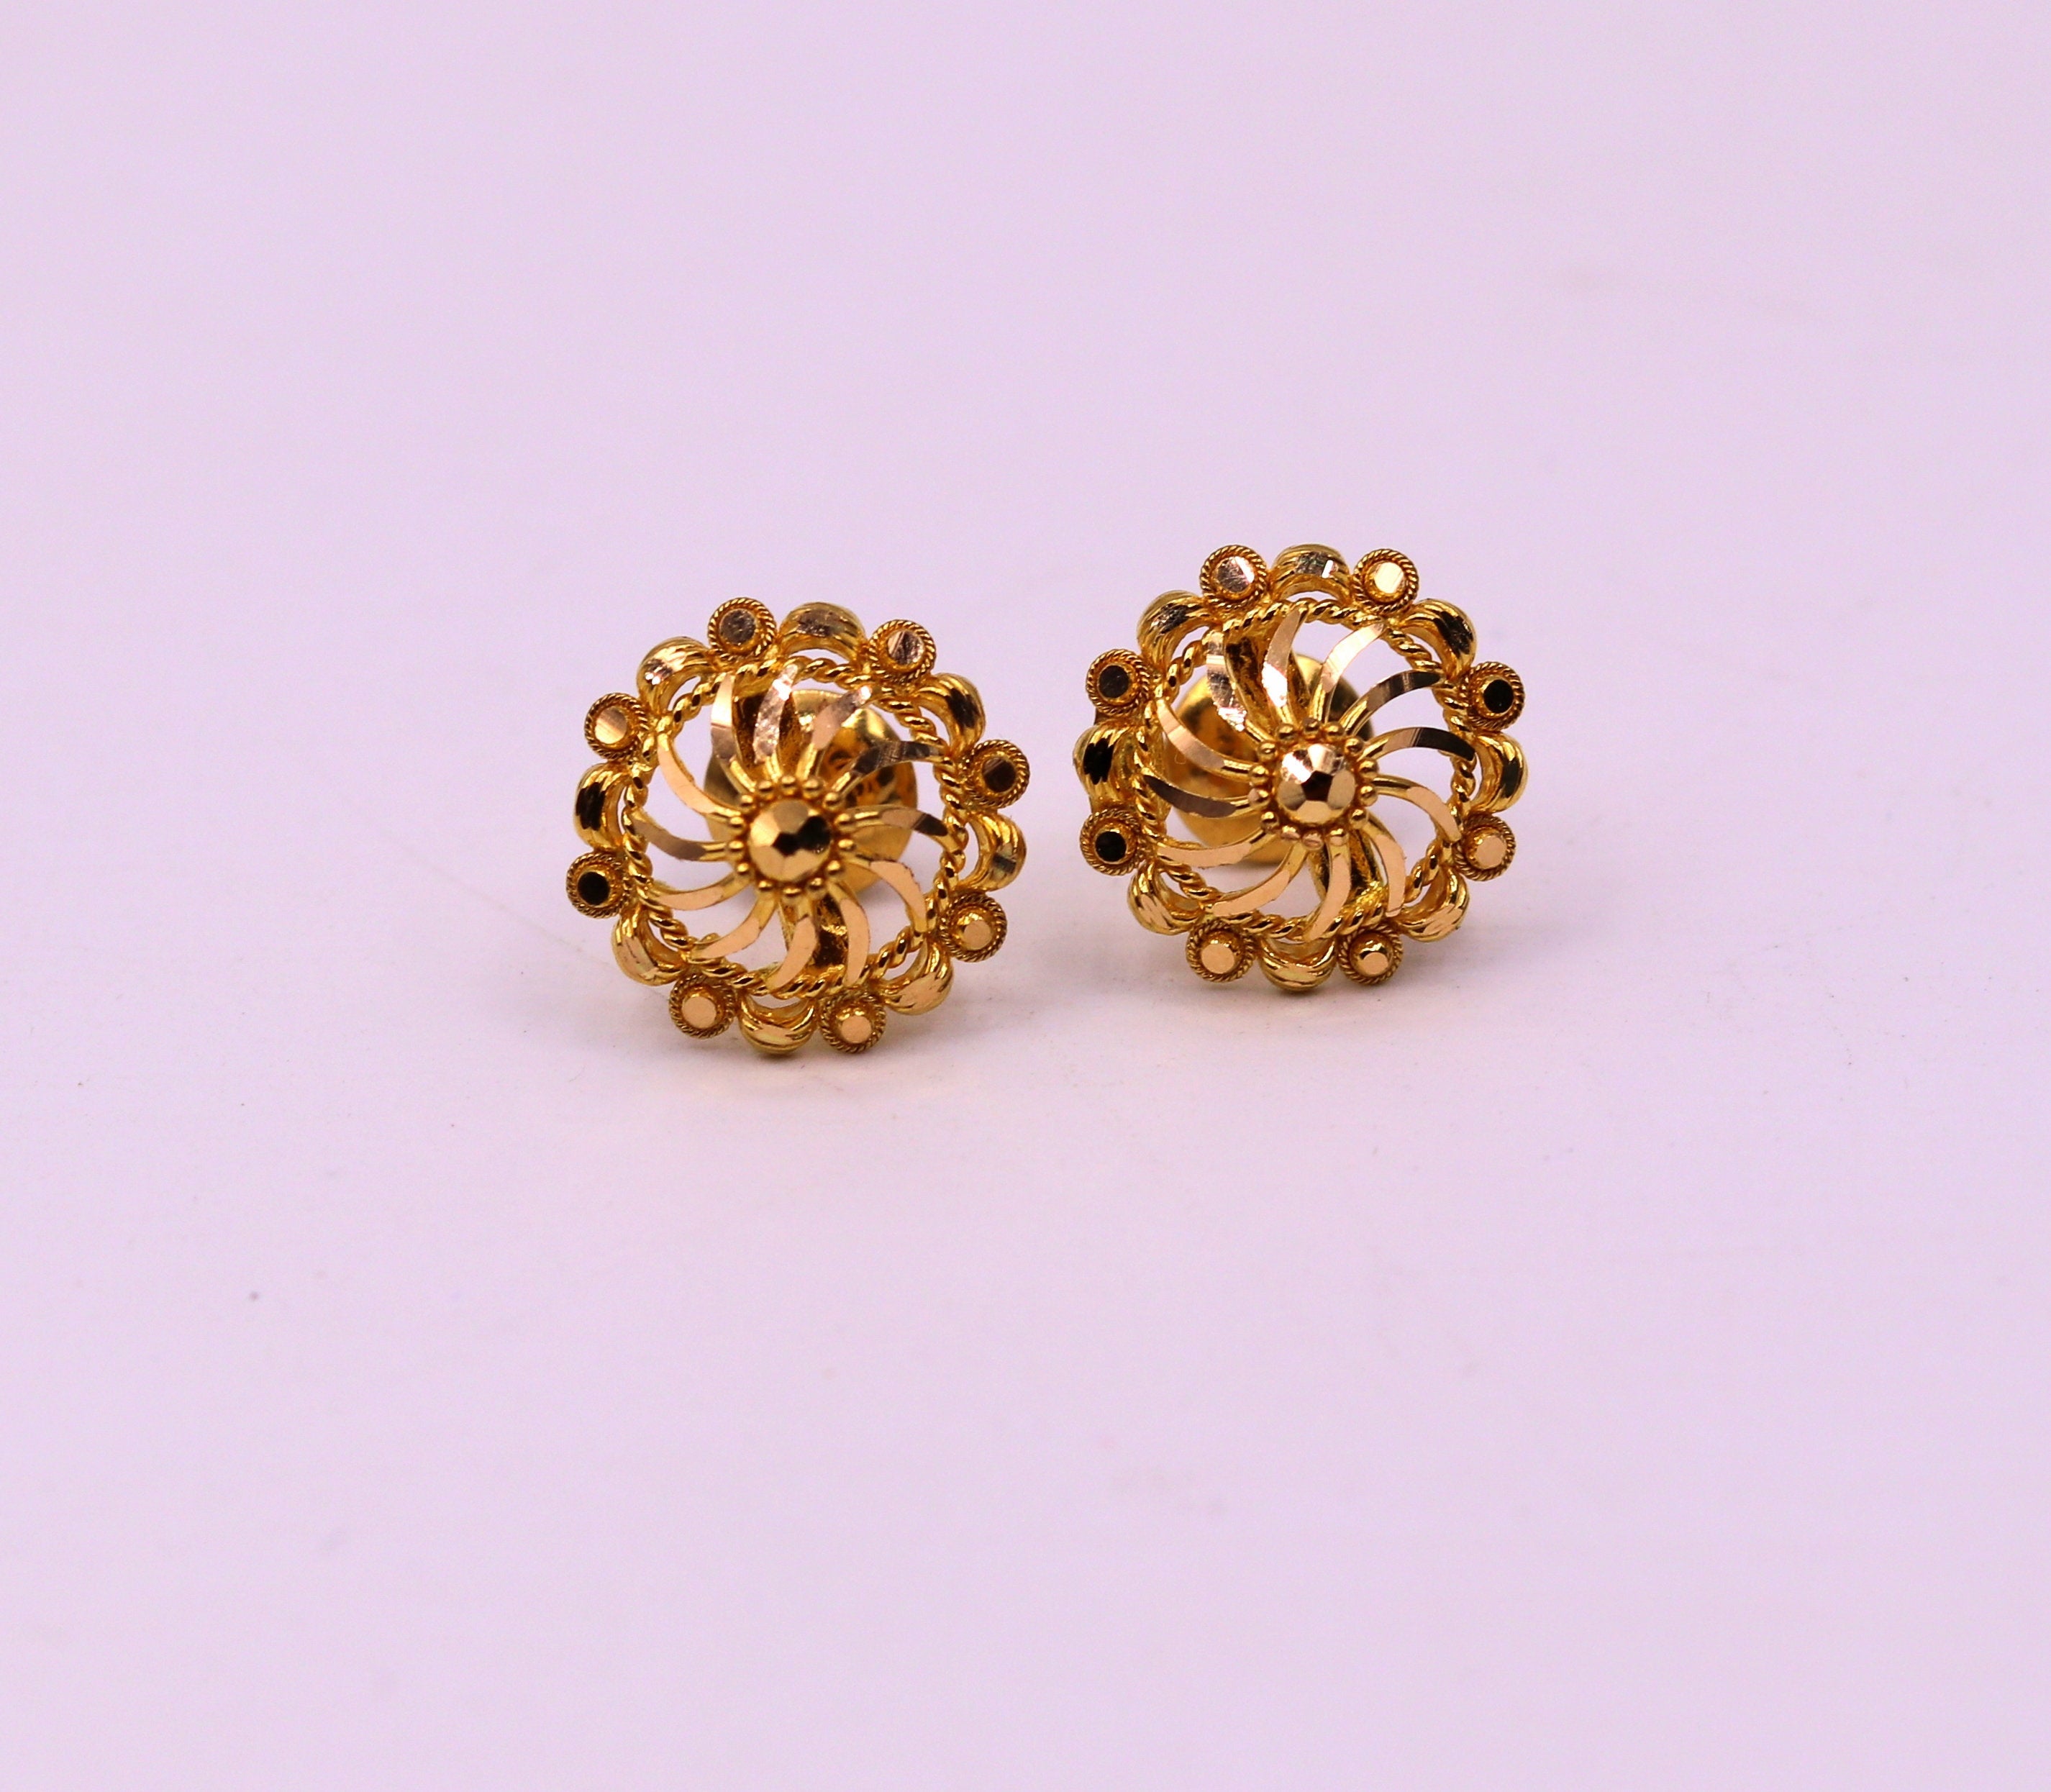 Buy Traditional Gold Earrings Design Simple Daily Use Earrings for Women